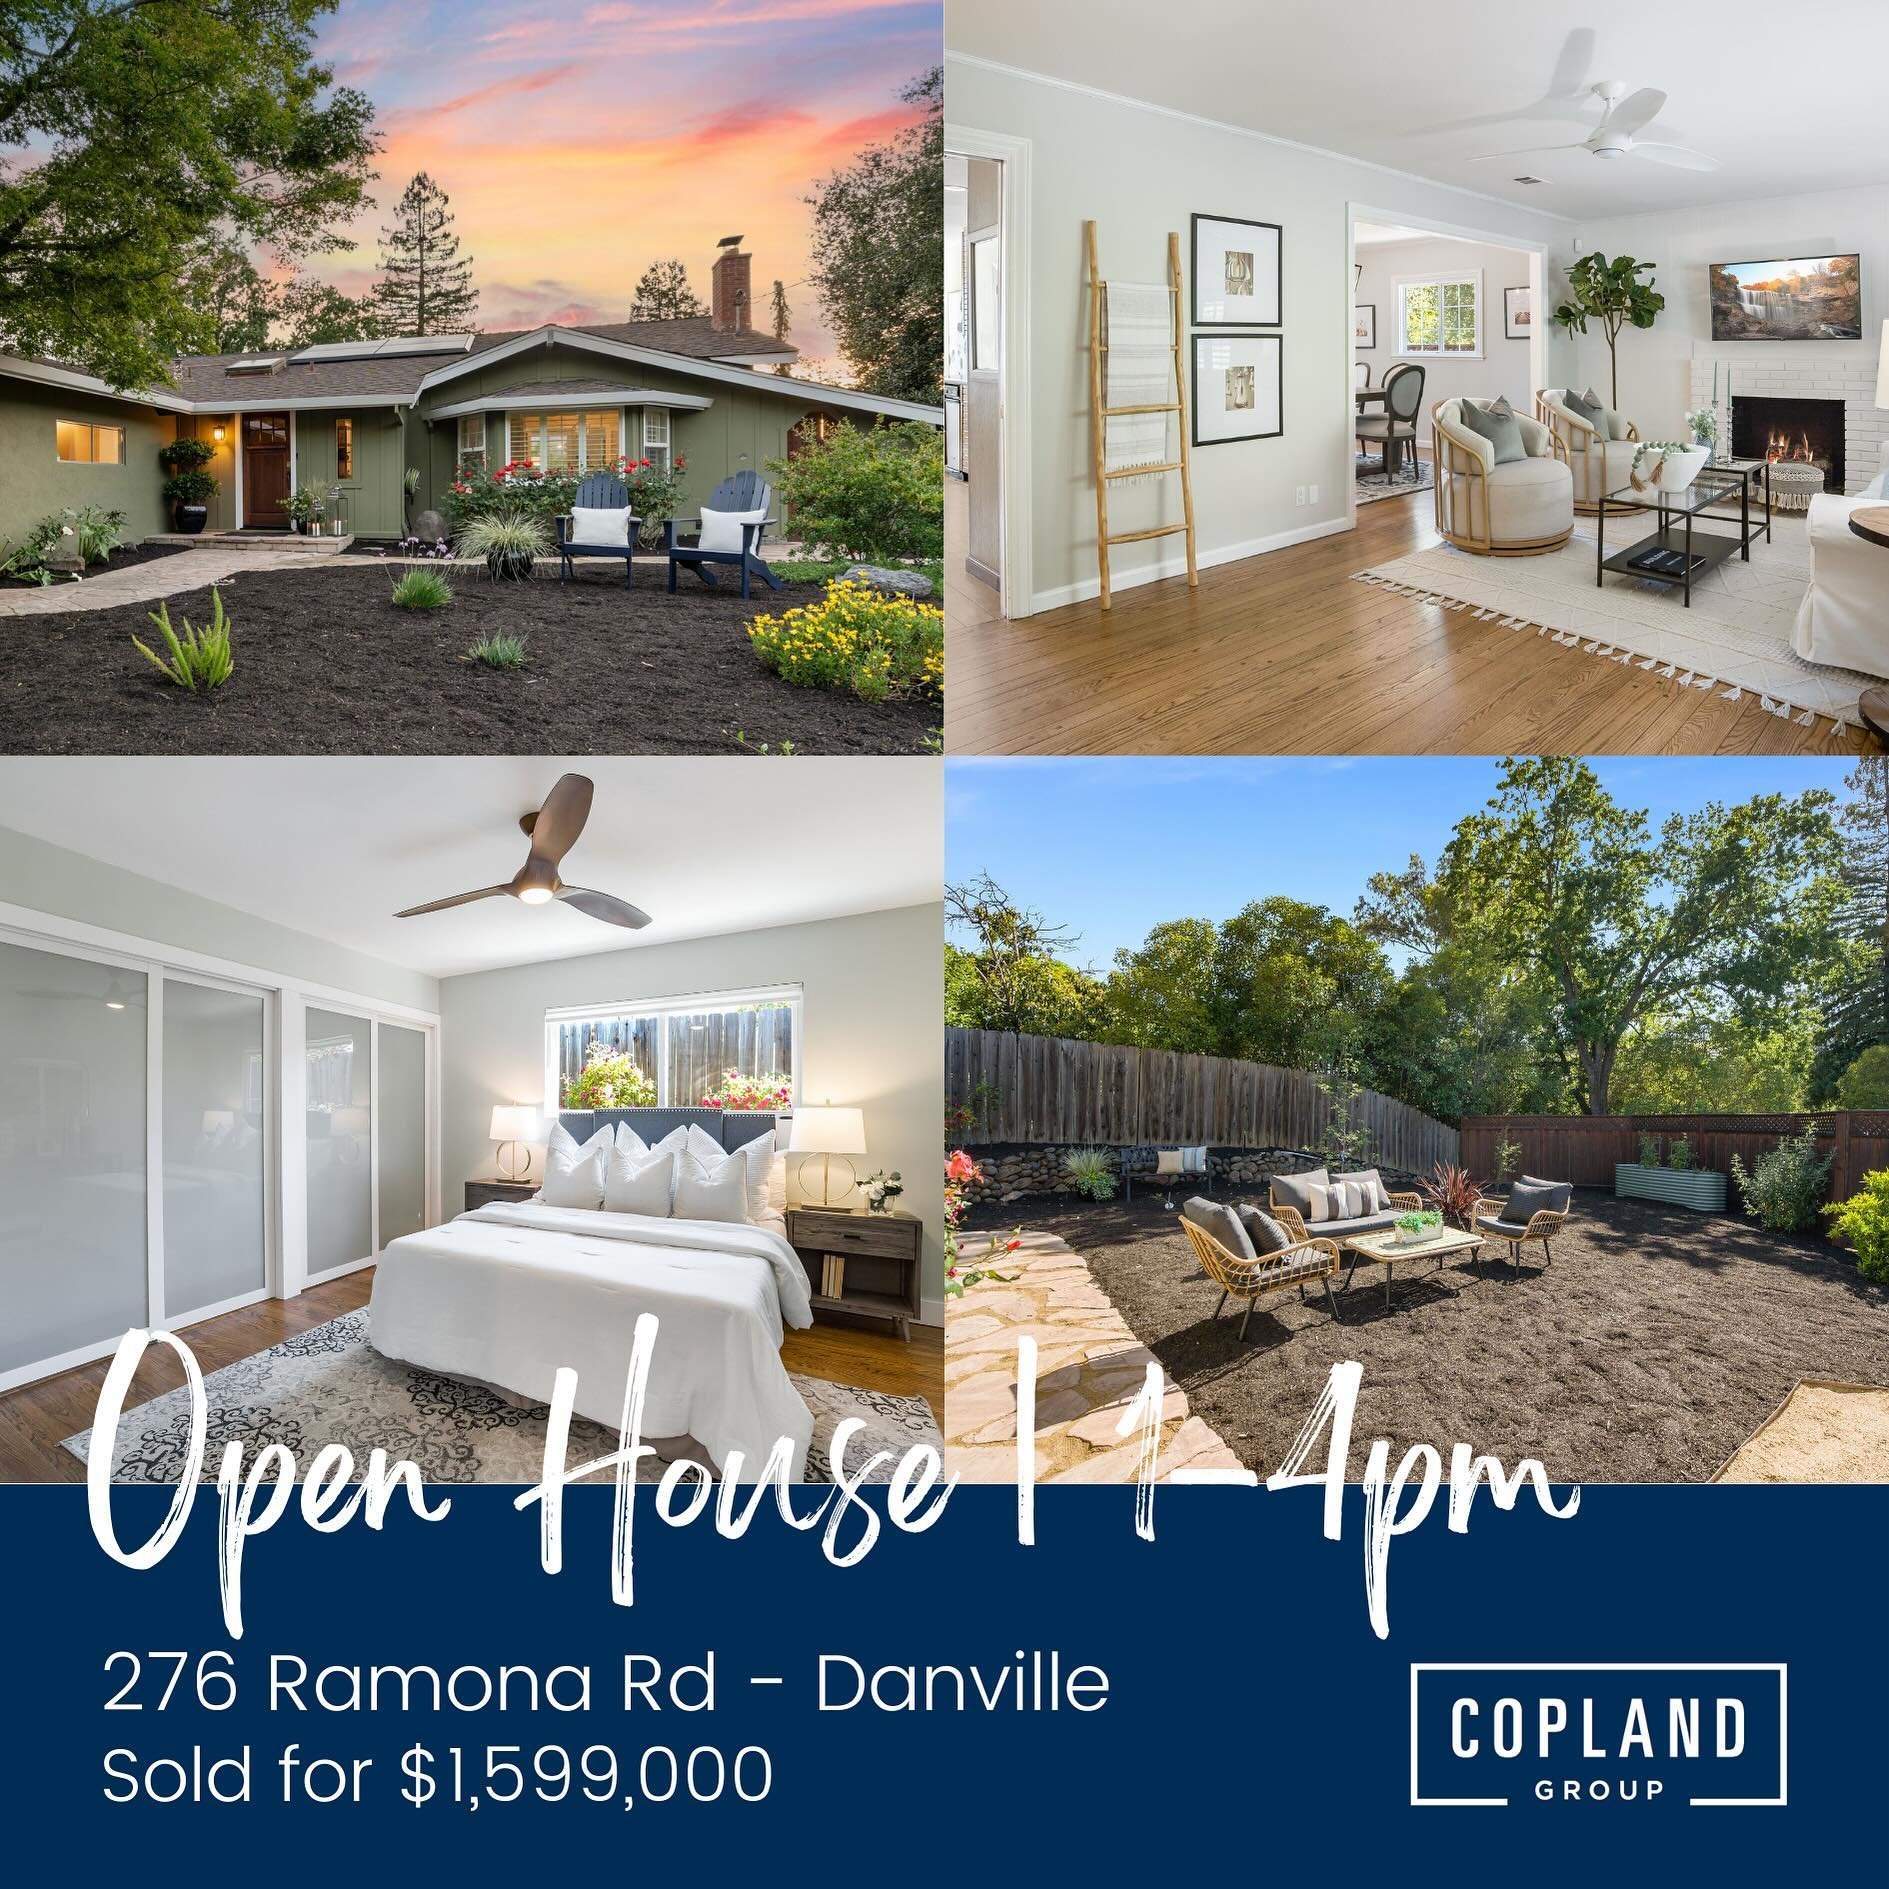 Join us for an open house today at our beautiful new listing at 276 Ramona Rd in Danville 🏡🤩 from 1-4pm

Perfectly located in the heart of Danville, this beautiful home features three bedrooms + office, 2 bathrooms, and is situated on a spacious &f